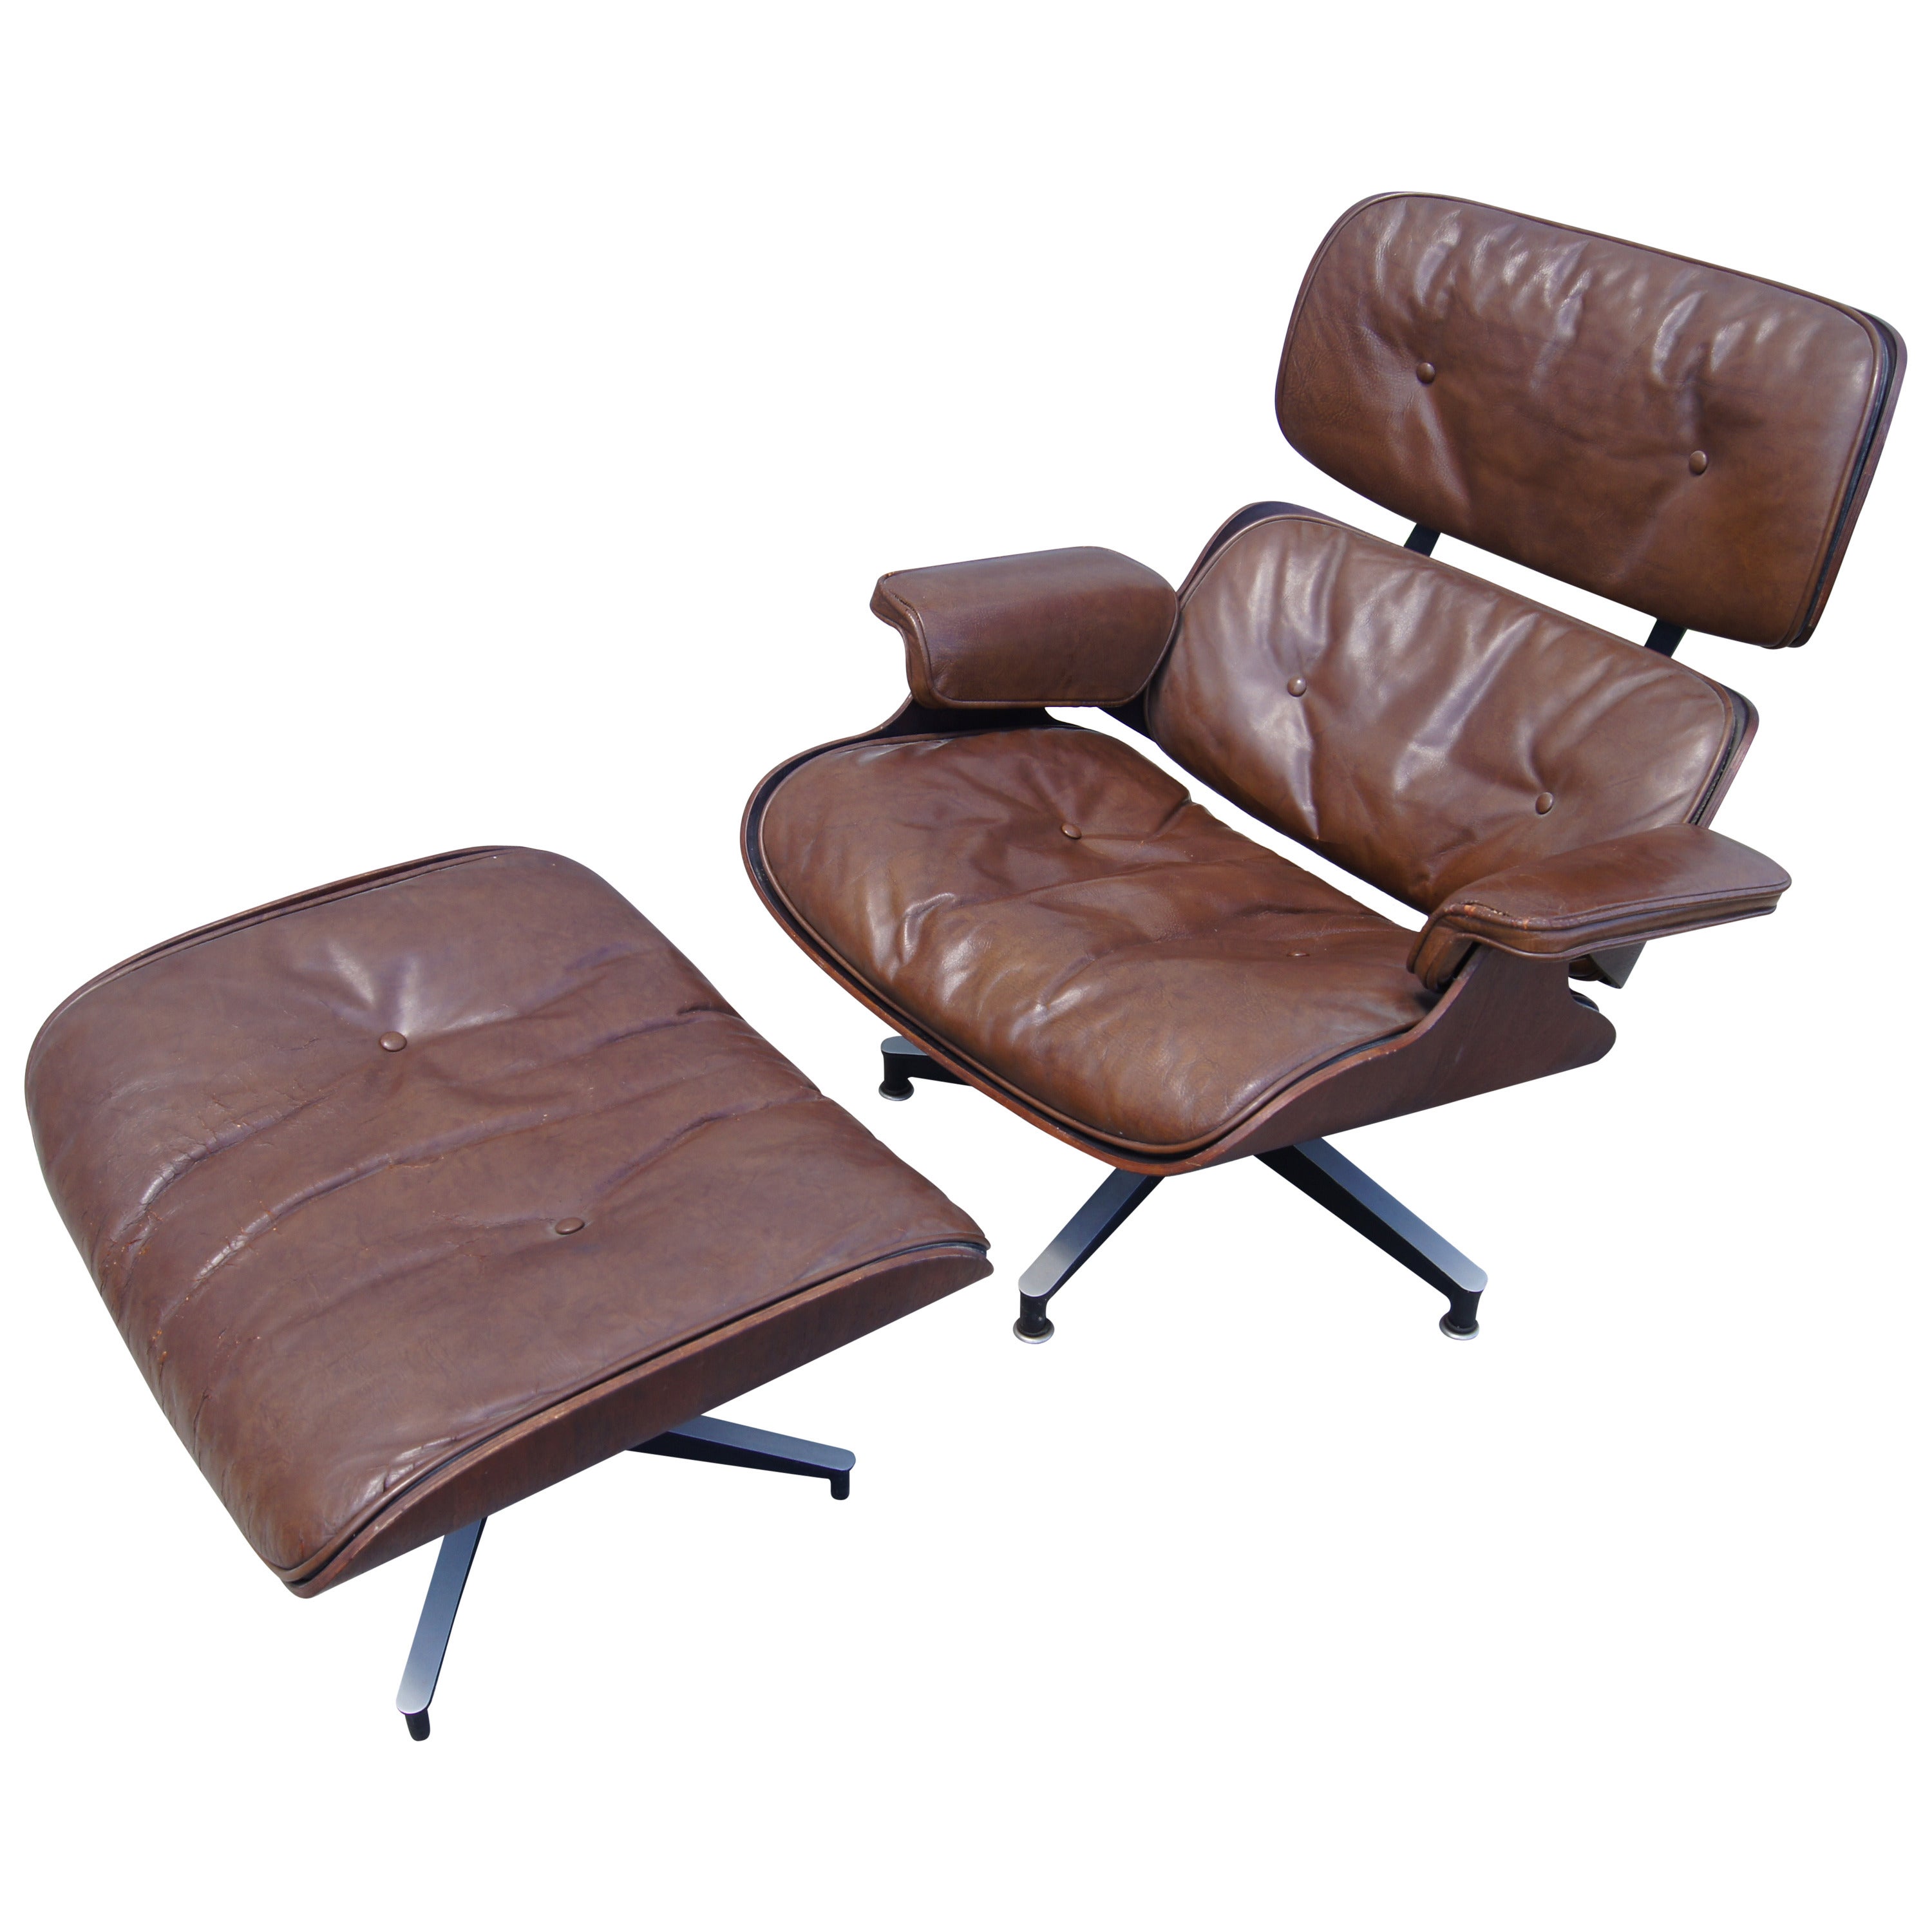 Early Production Lounge Chair & Ottoman by Charles & Ray Eames for Herman Miller